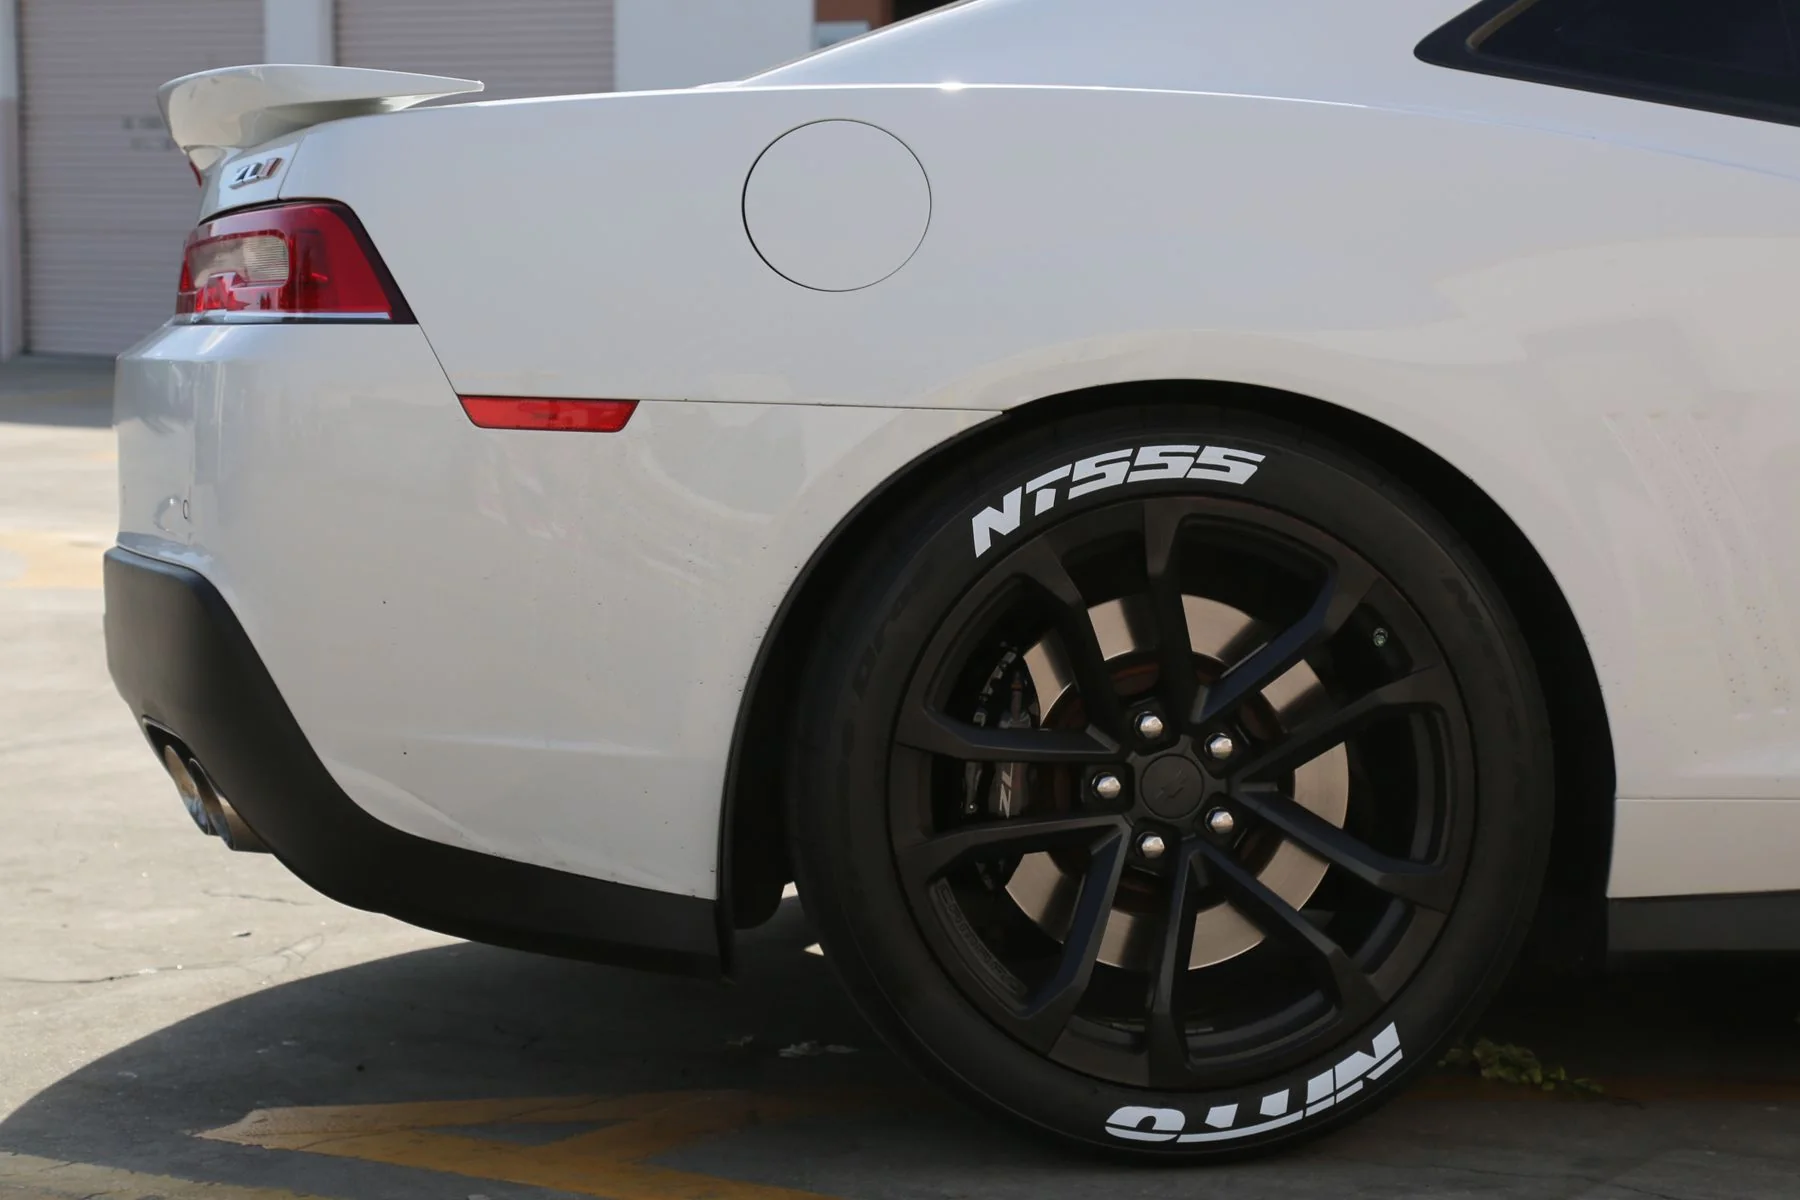 Nitto NT555 tires